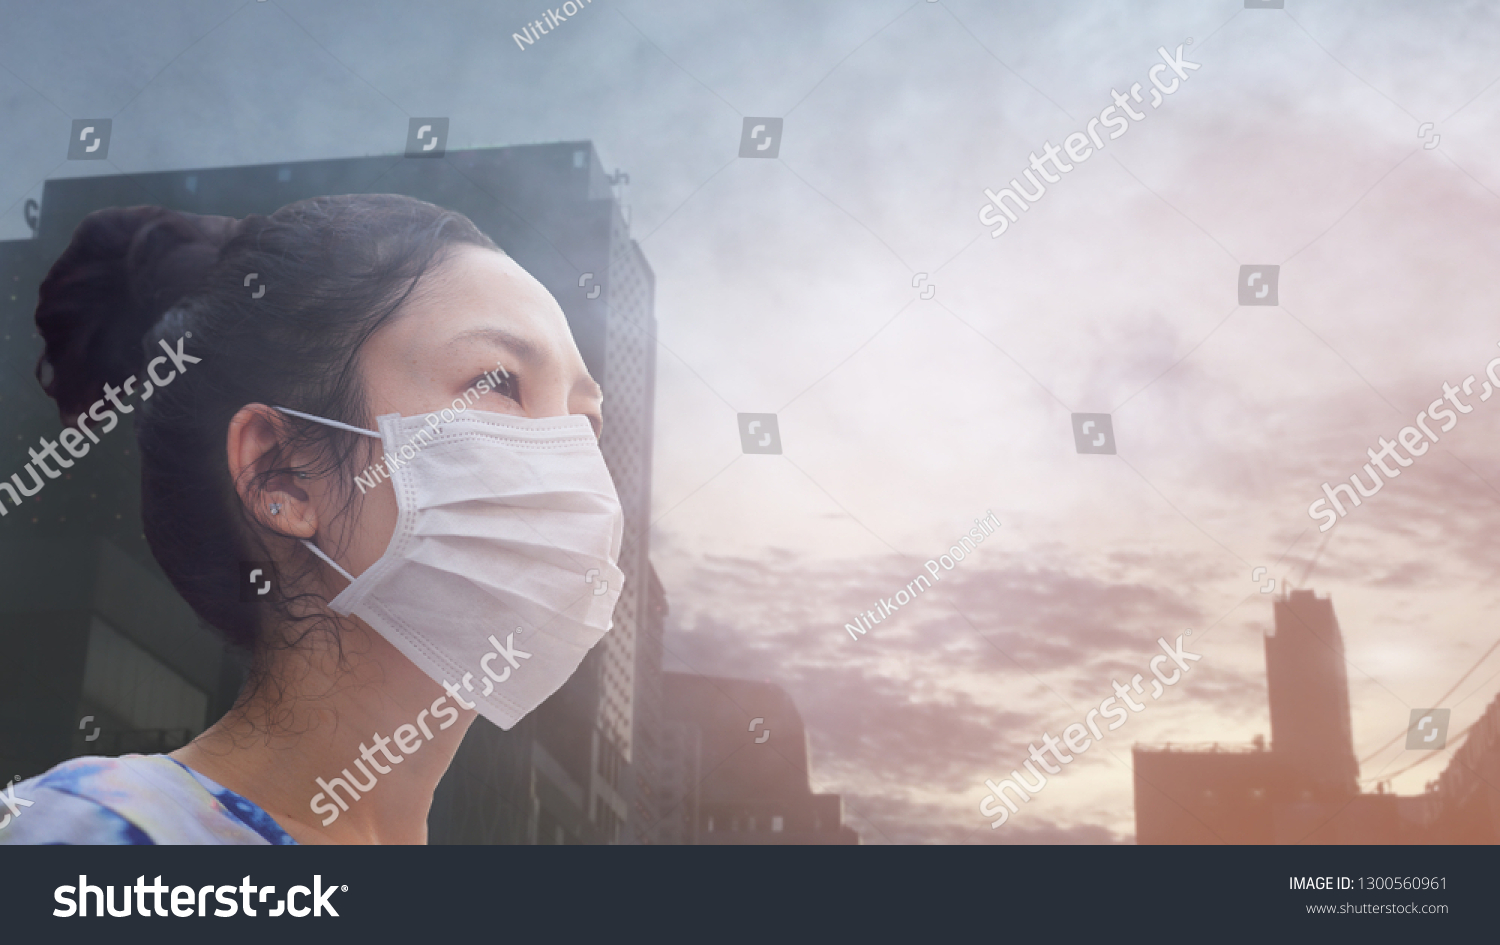 women wearing facial hygienic mask for Safety outdoor. People in masks because of fine dust in thailand. Problems found in major cities around the world. air pollution,Environmental awareness concept #1300560961